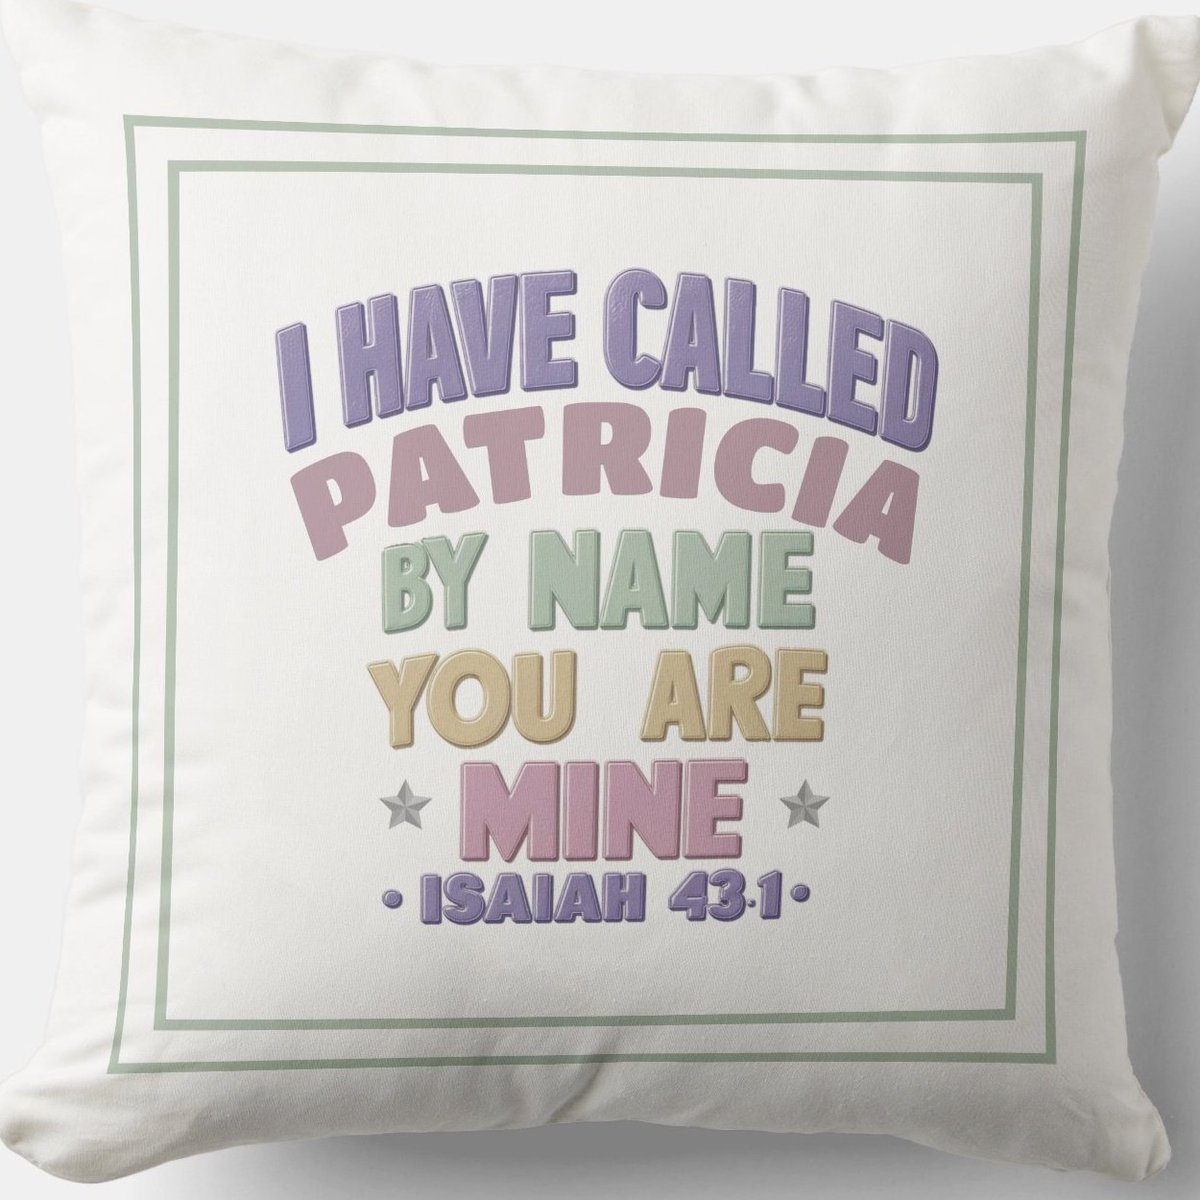 I Have Called You By Name You Are Mine zazzle.com/i_have_called_… #Pillow Throw #Blessing #JesusChrist #JesusSaves #Jesus #christian #spiritual #Homedecoration #uniquegift #giftideas #giftformom #giftidea #HolySpirit #pillows #giftshop #giftsforher #giftsformom #faith #hope #Destiny